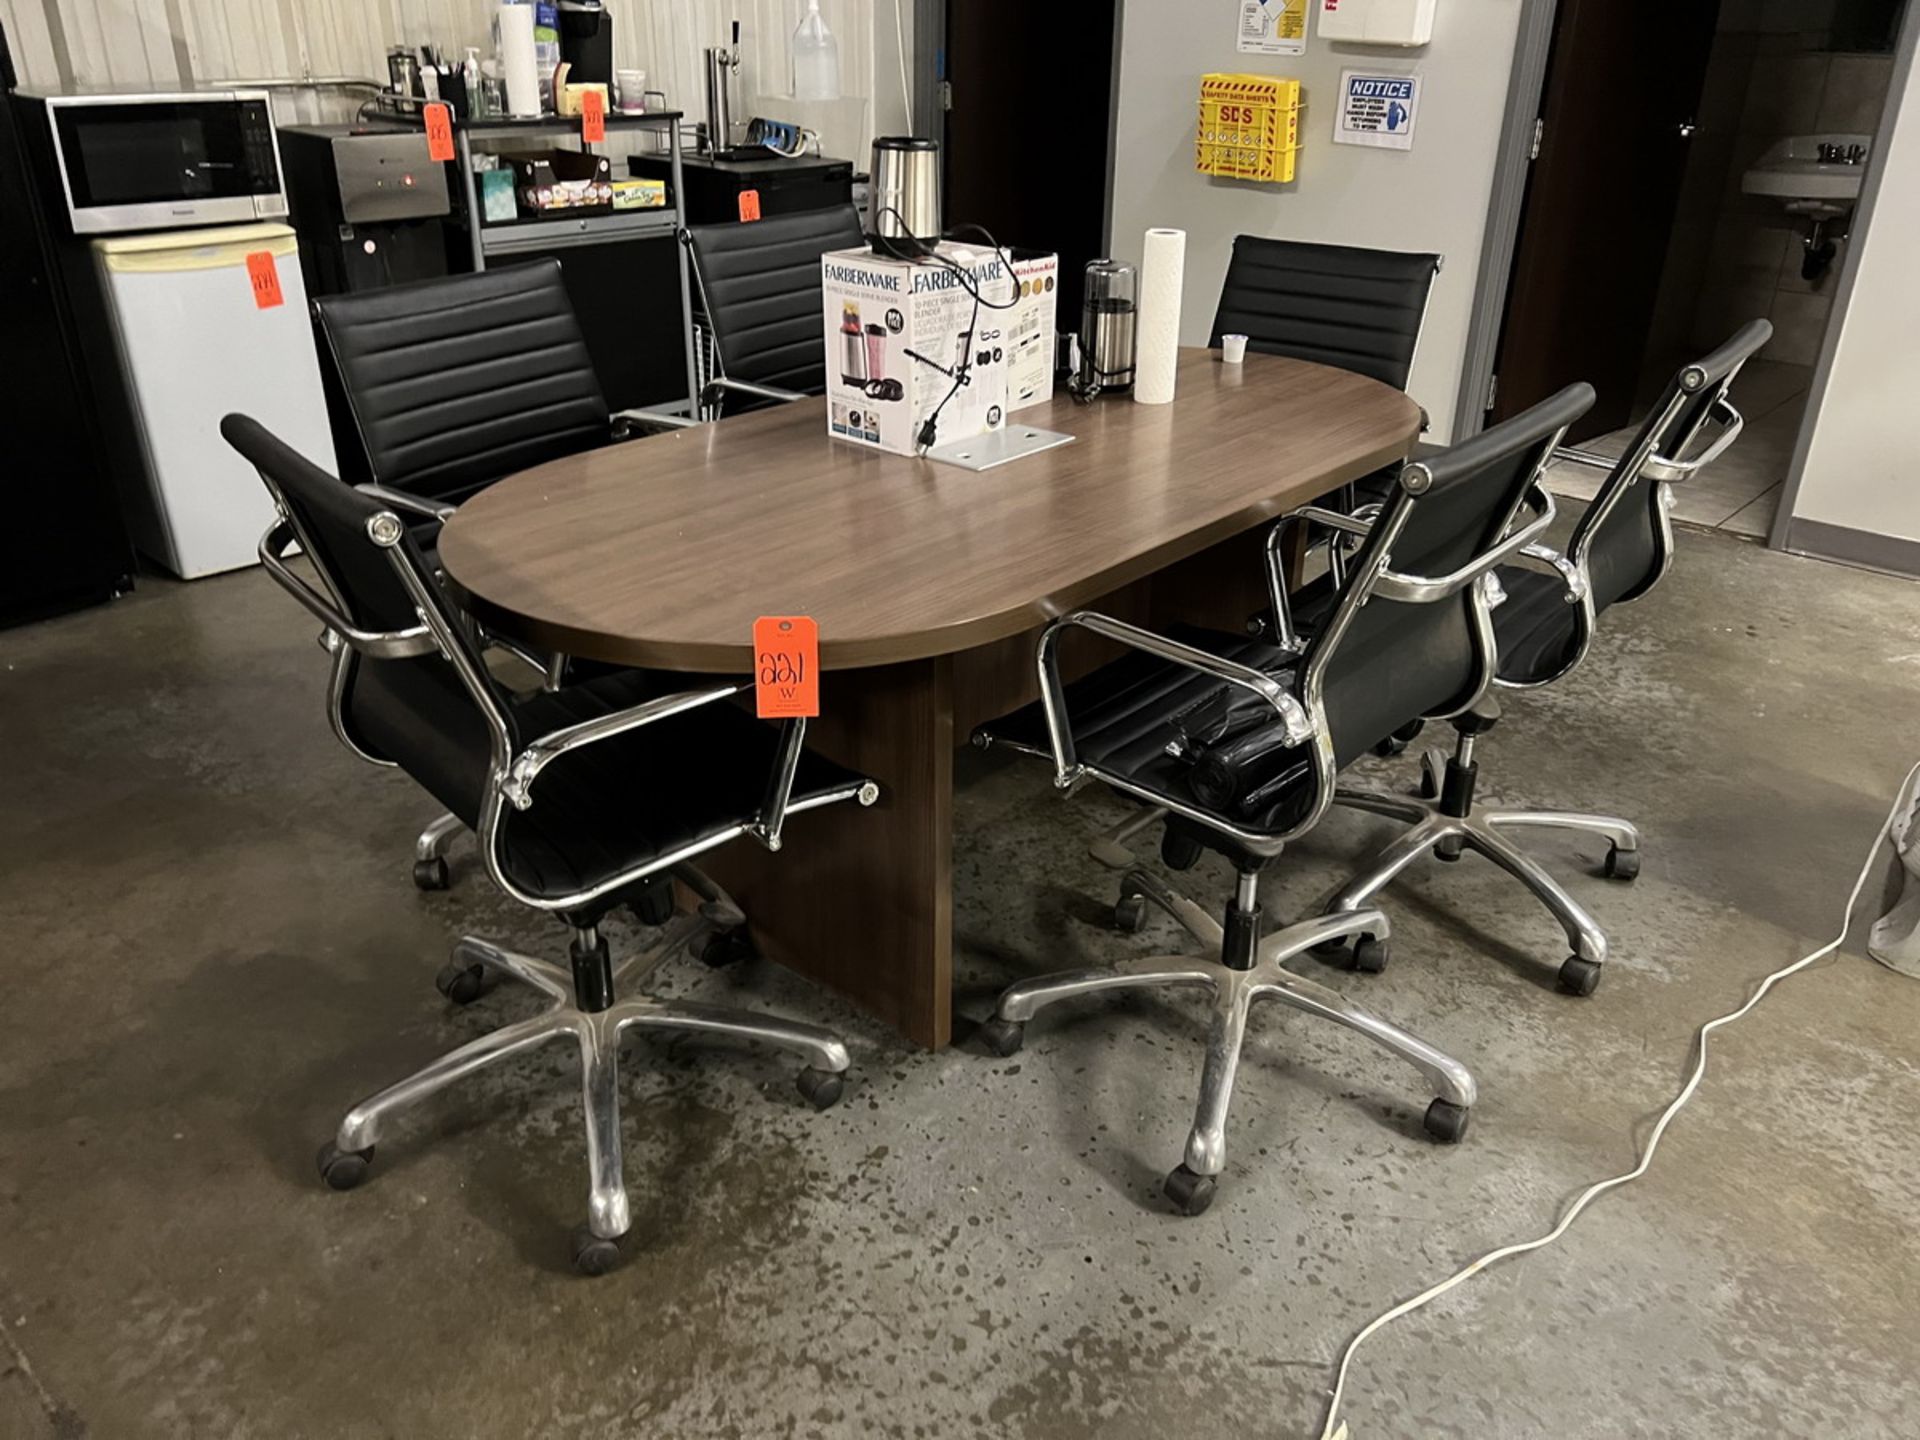 Lot - 71 in. x 36 in. Oval-Shape Conference Table with (6) Conference Chairs